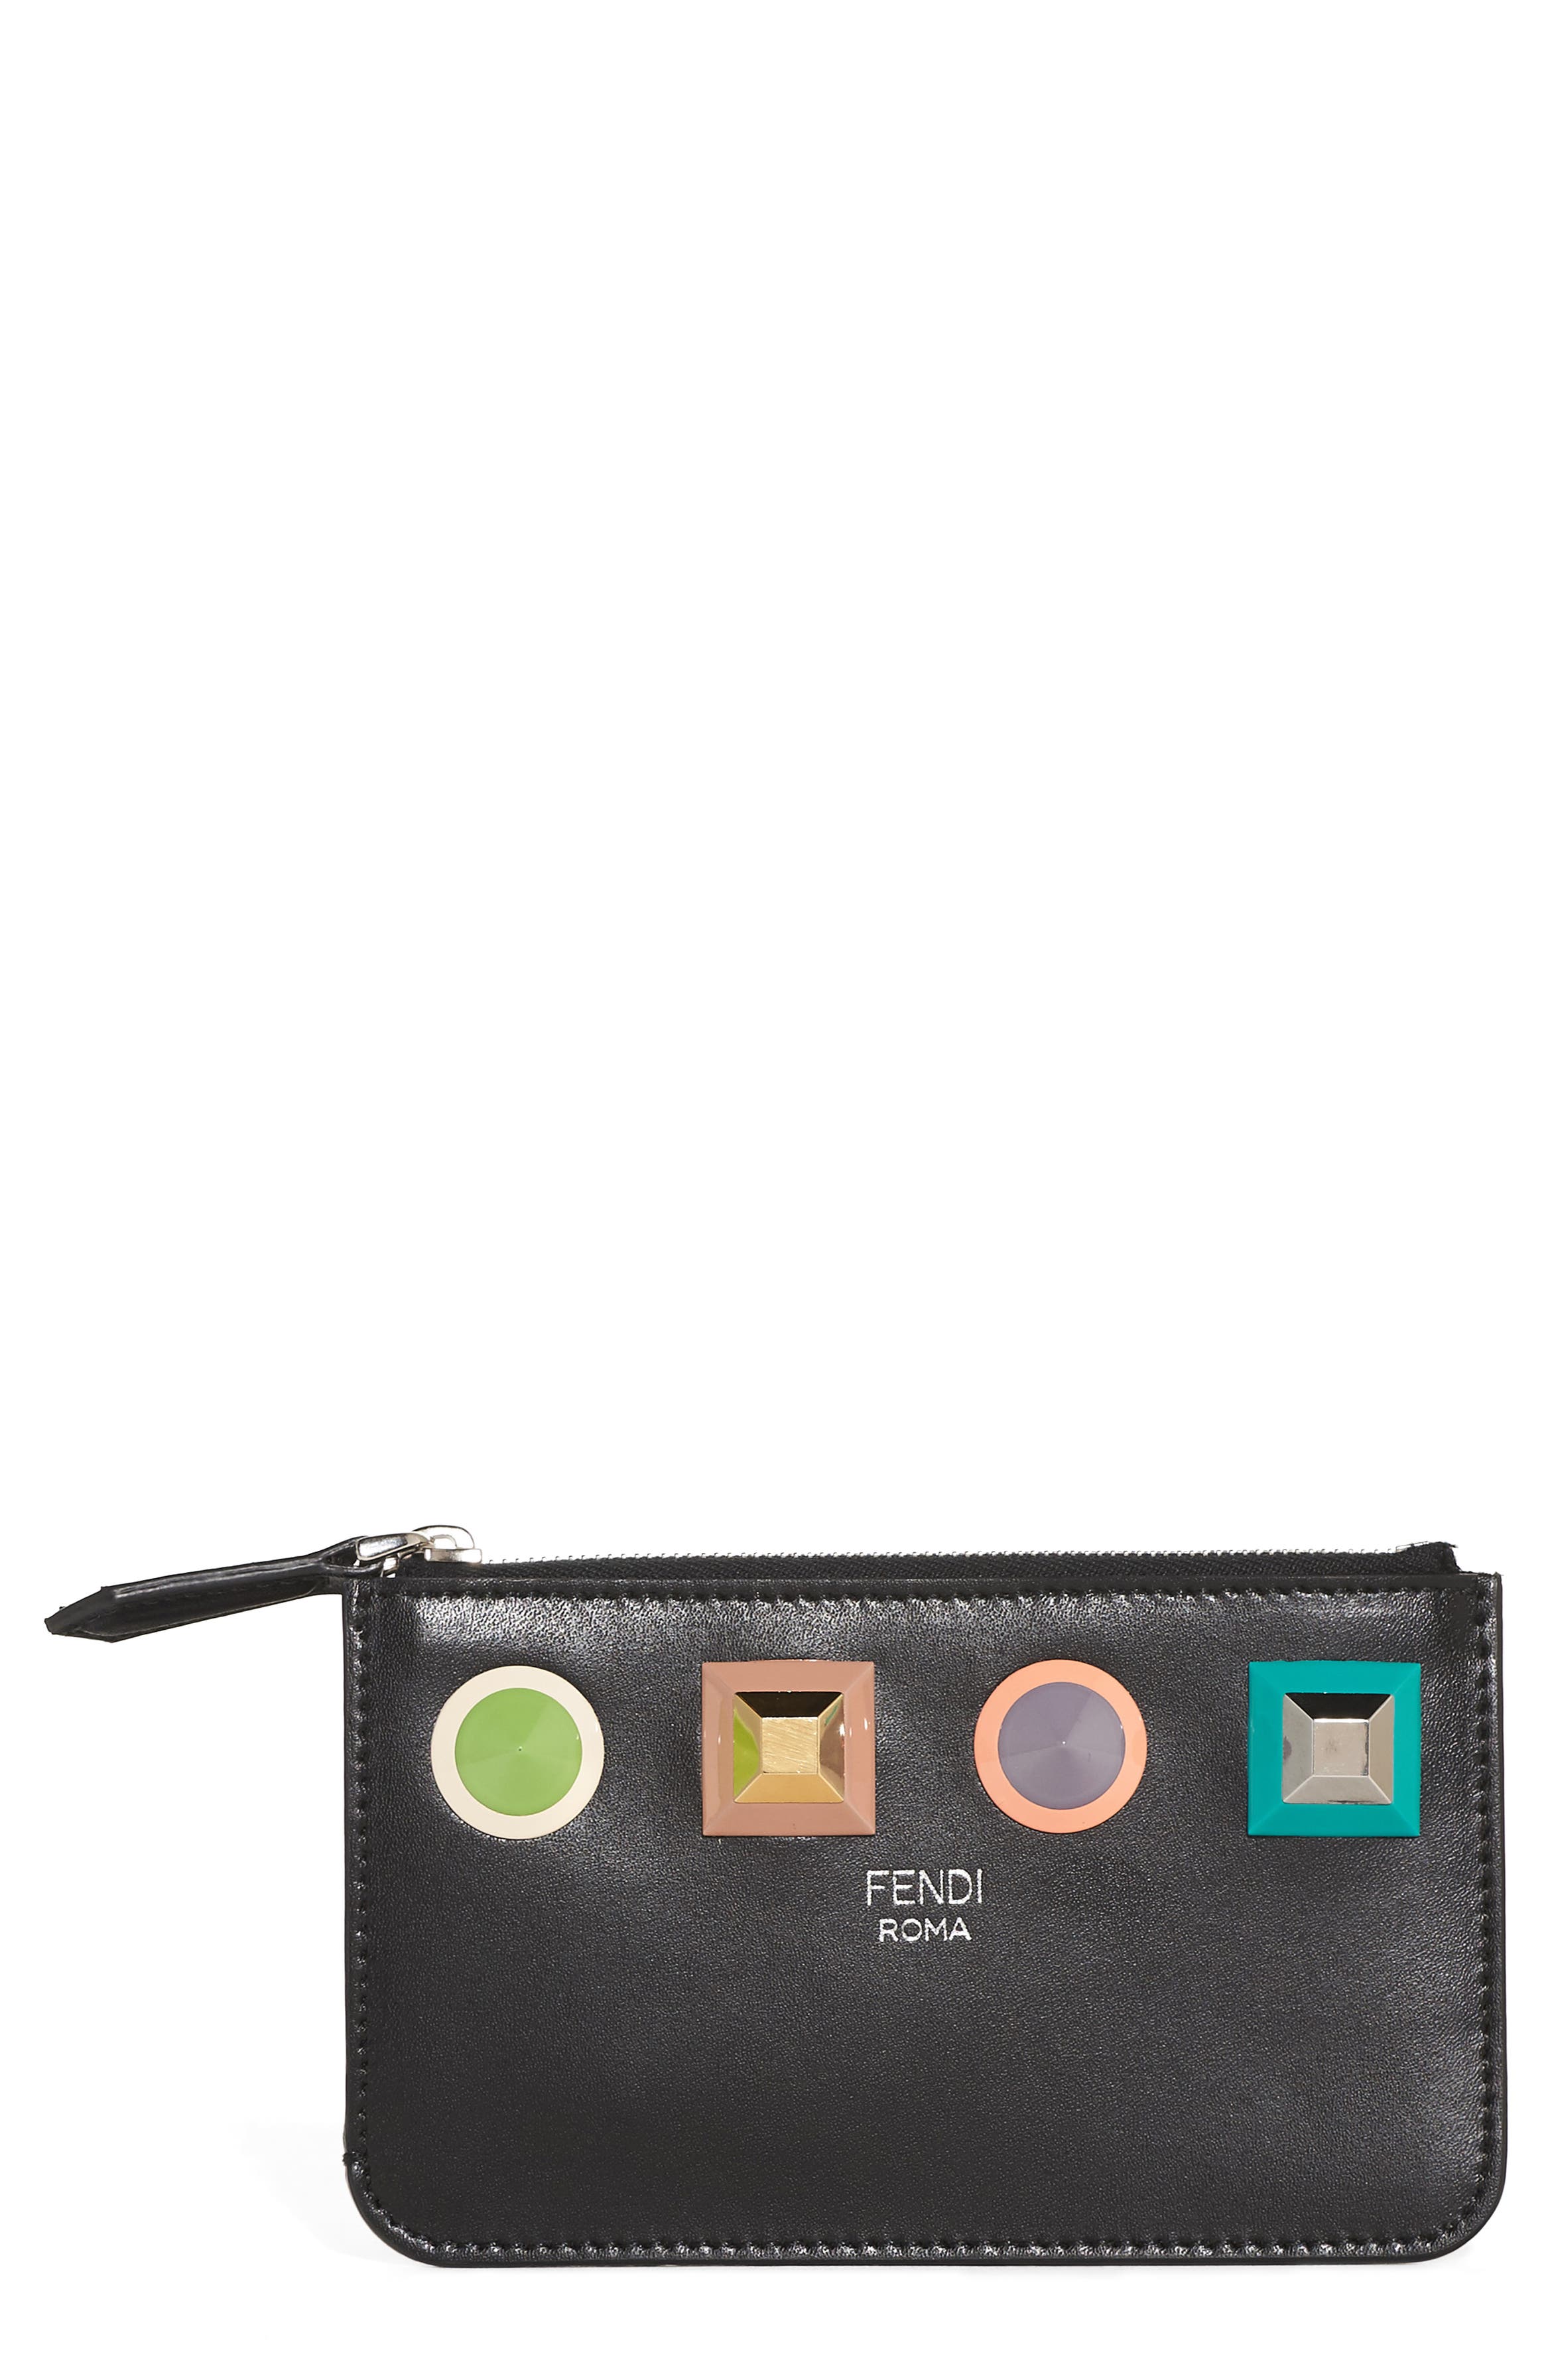 Fendi Large Studded Leather Key Pouch | Nordstrom